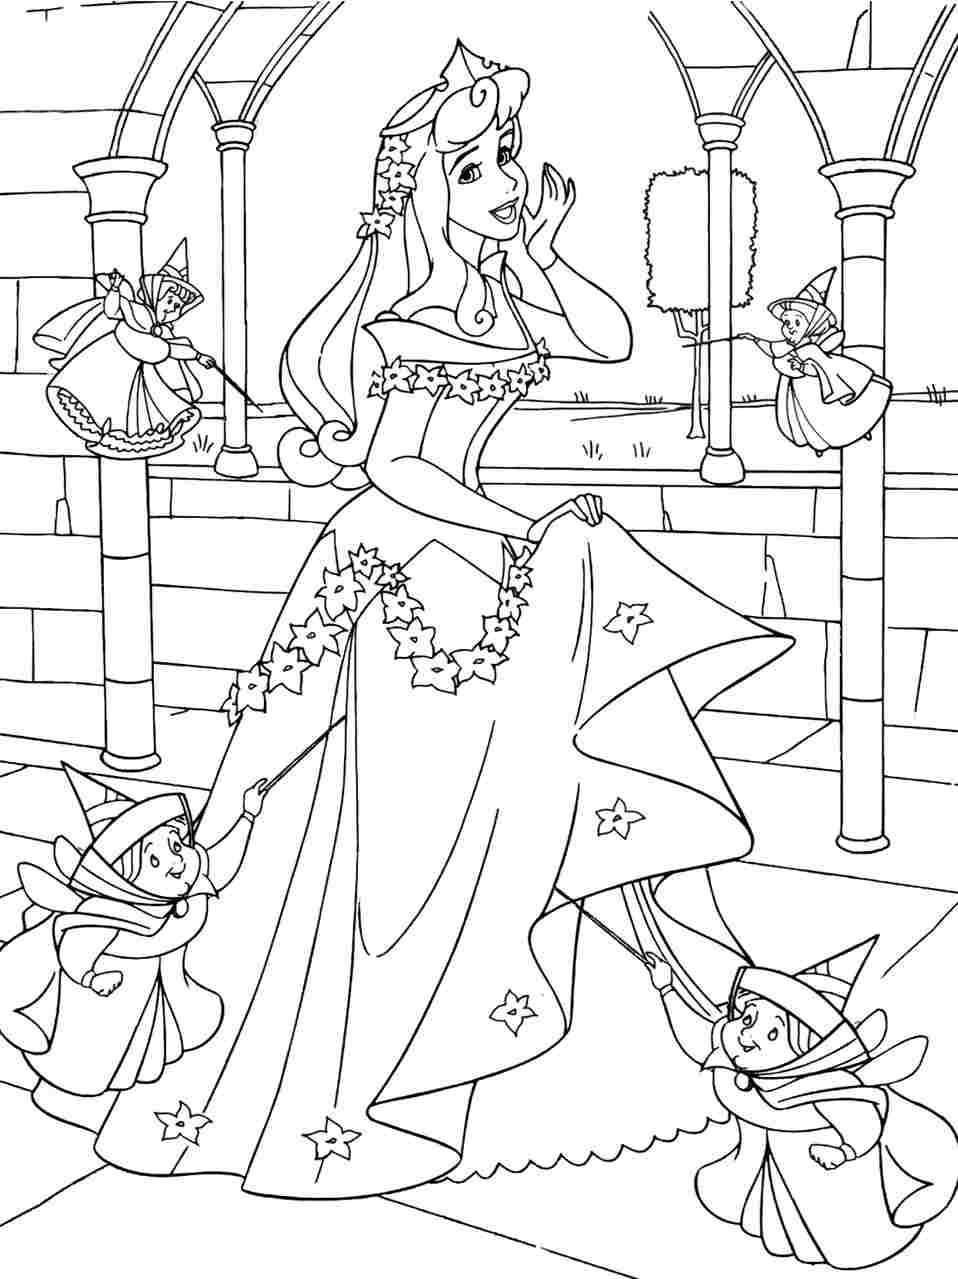 Free Printable Sleeping Beauty Coloring Pages For Kids Hol dir